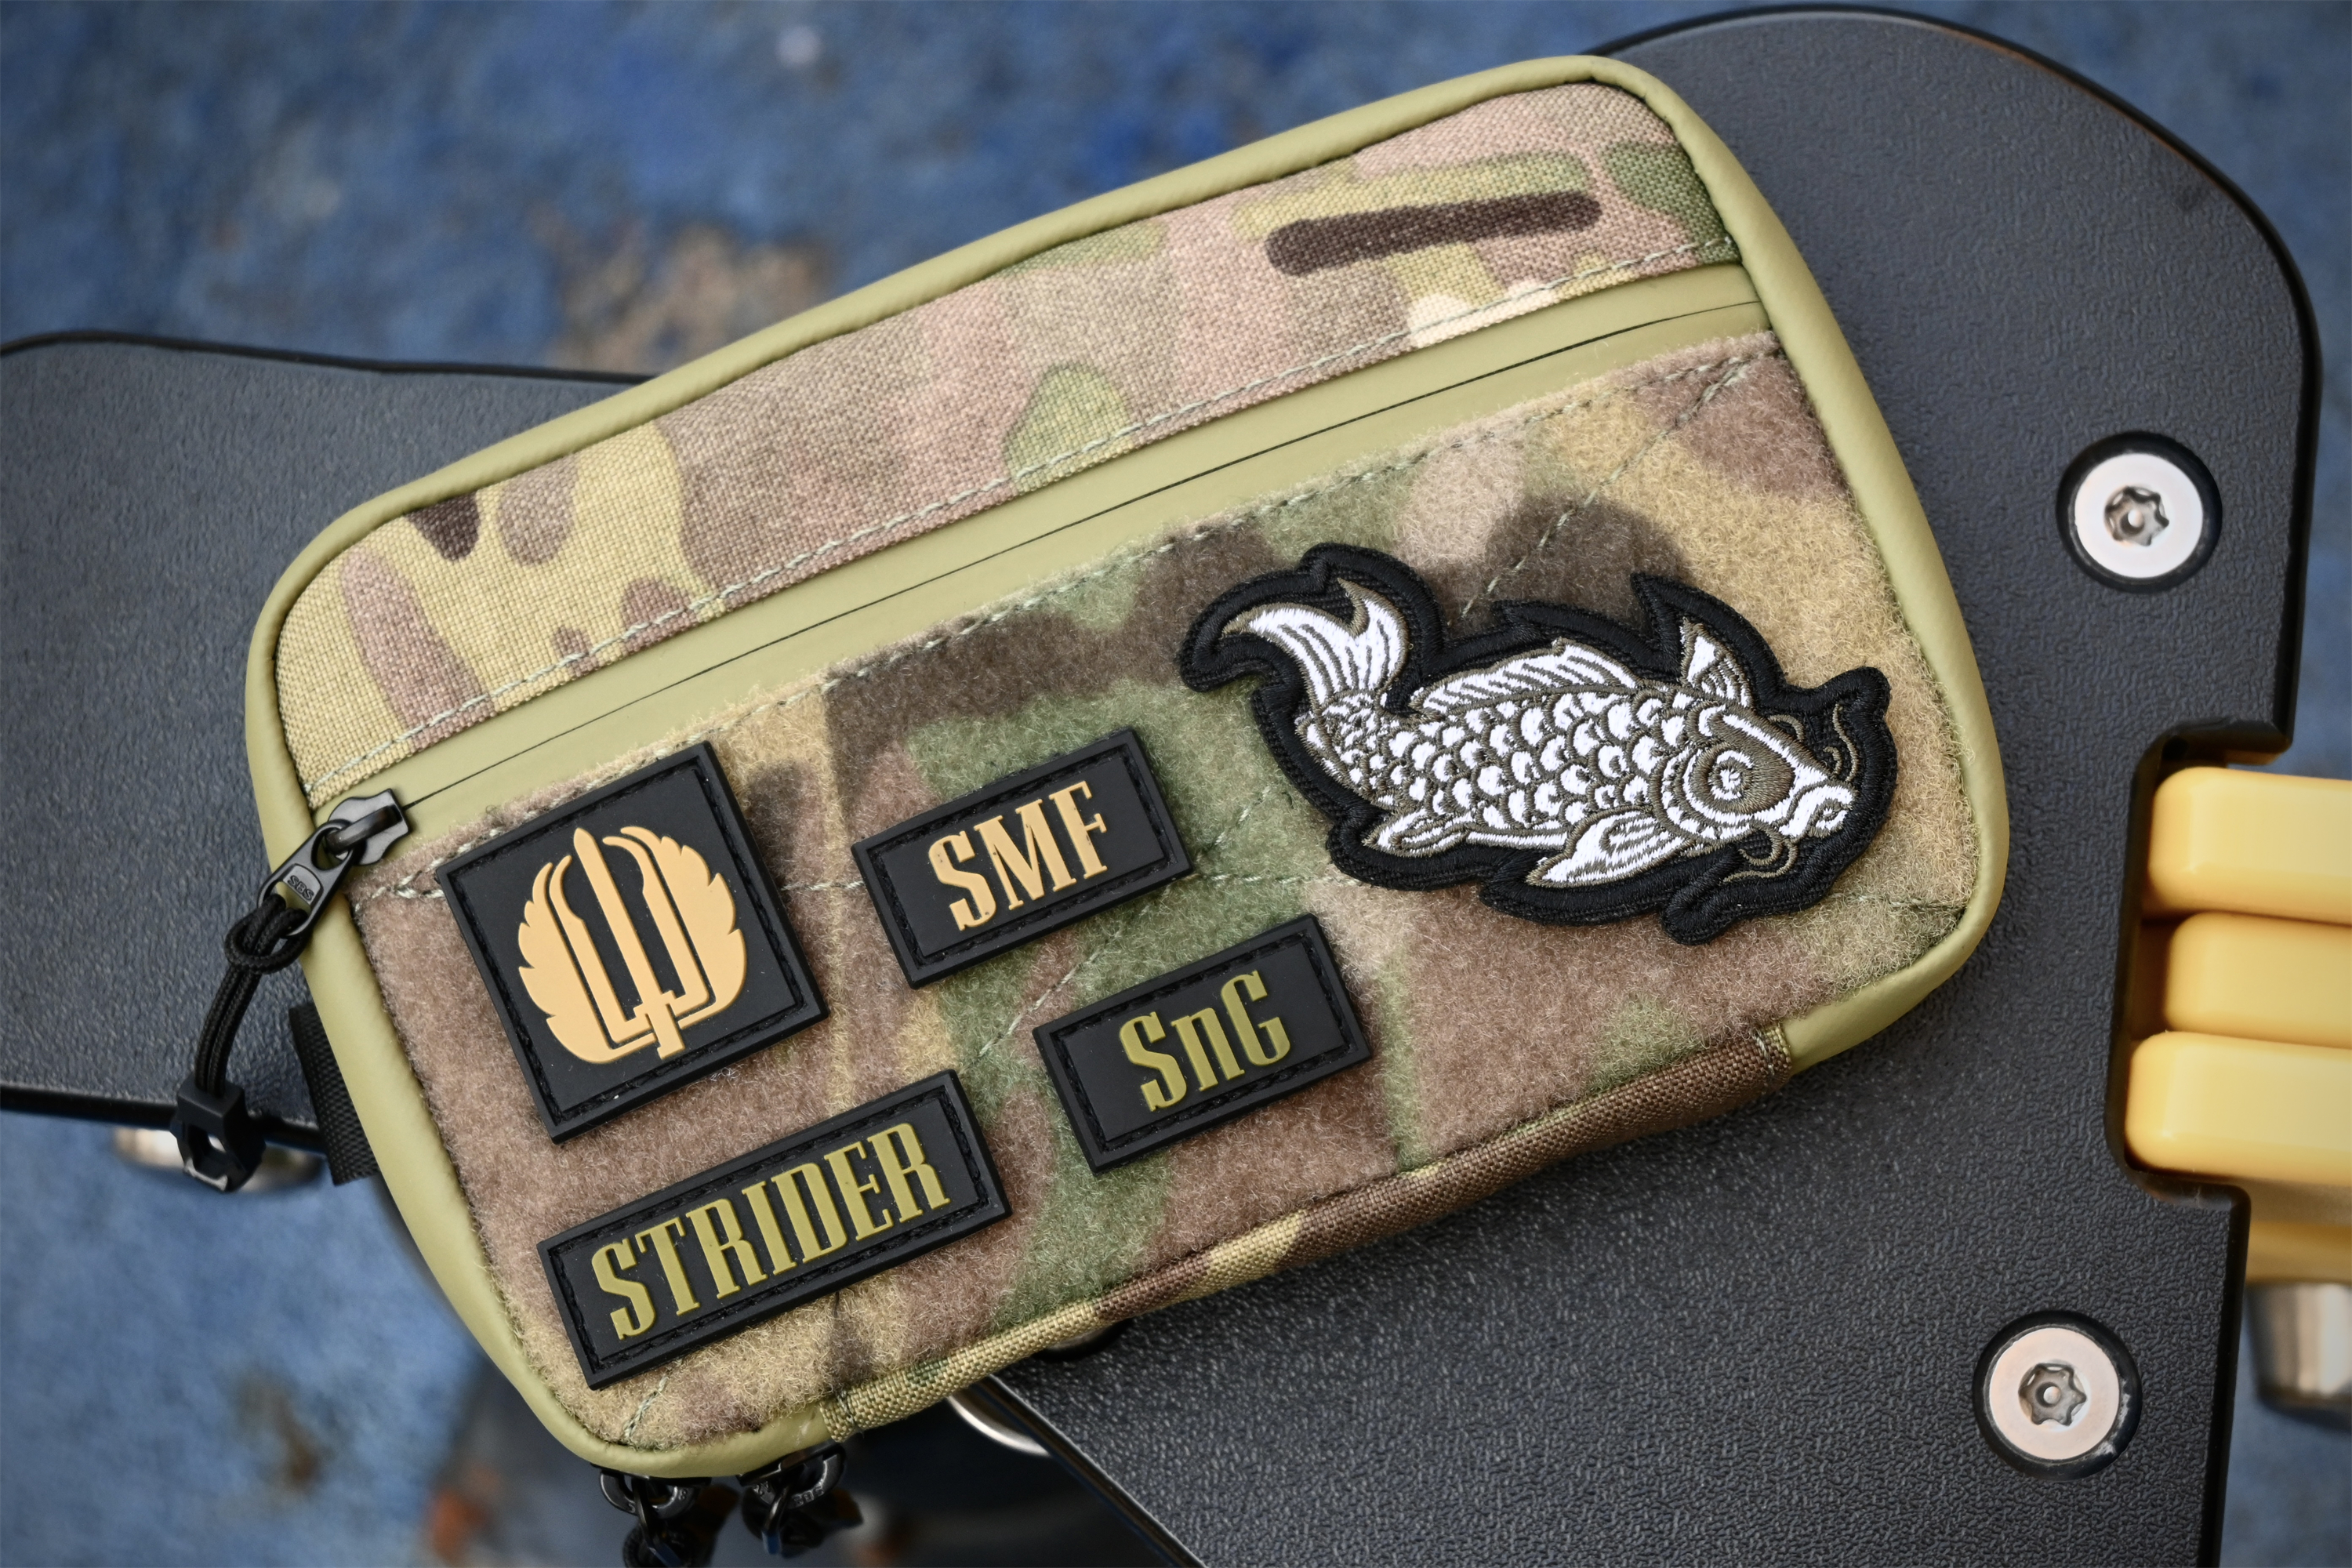 Newbee&GZ All-Protective EDC Pouch